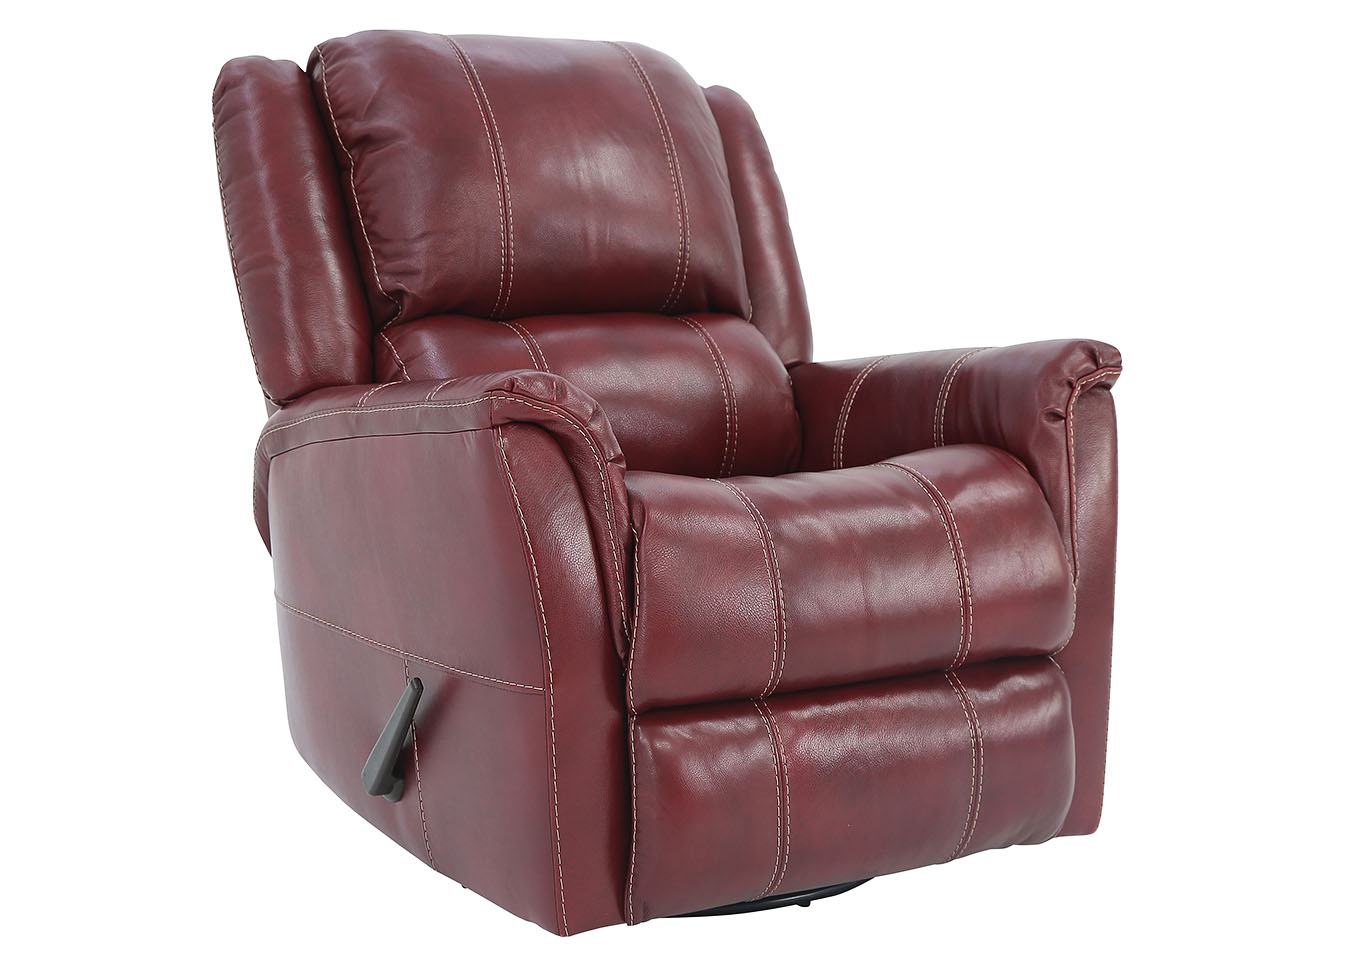 Bryce Red Leather Swivel Glider, Red Leather Rocker Recliner